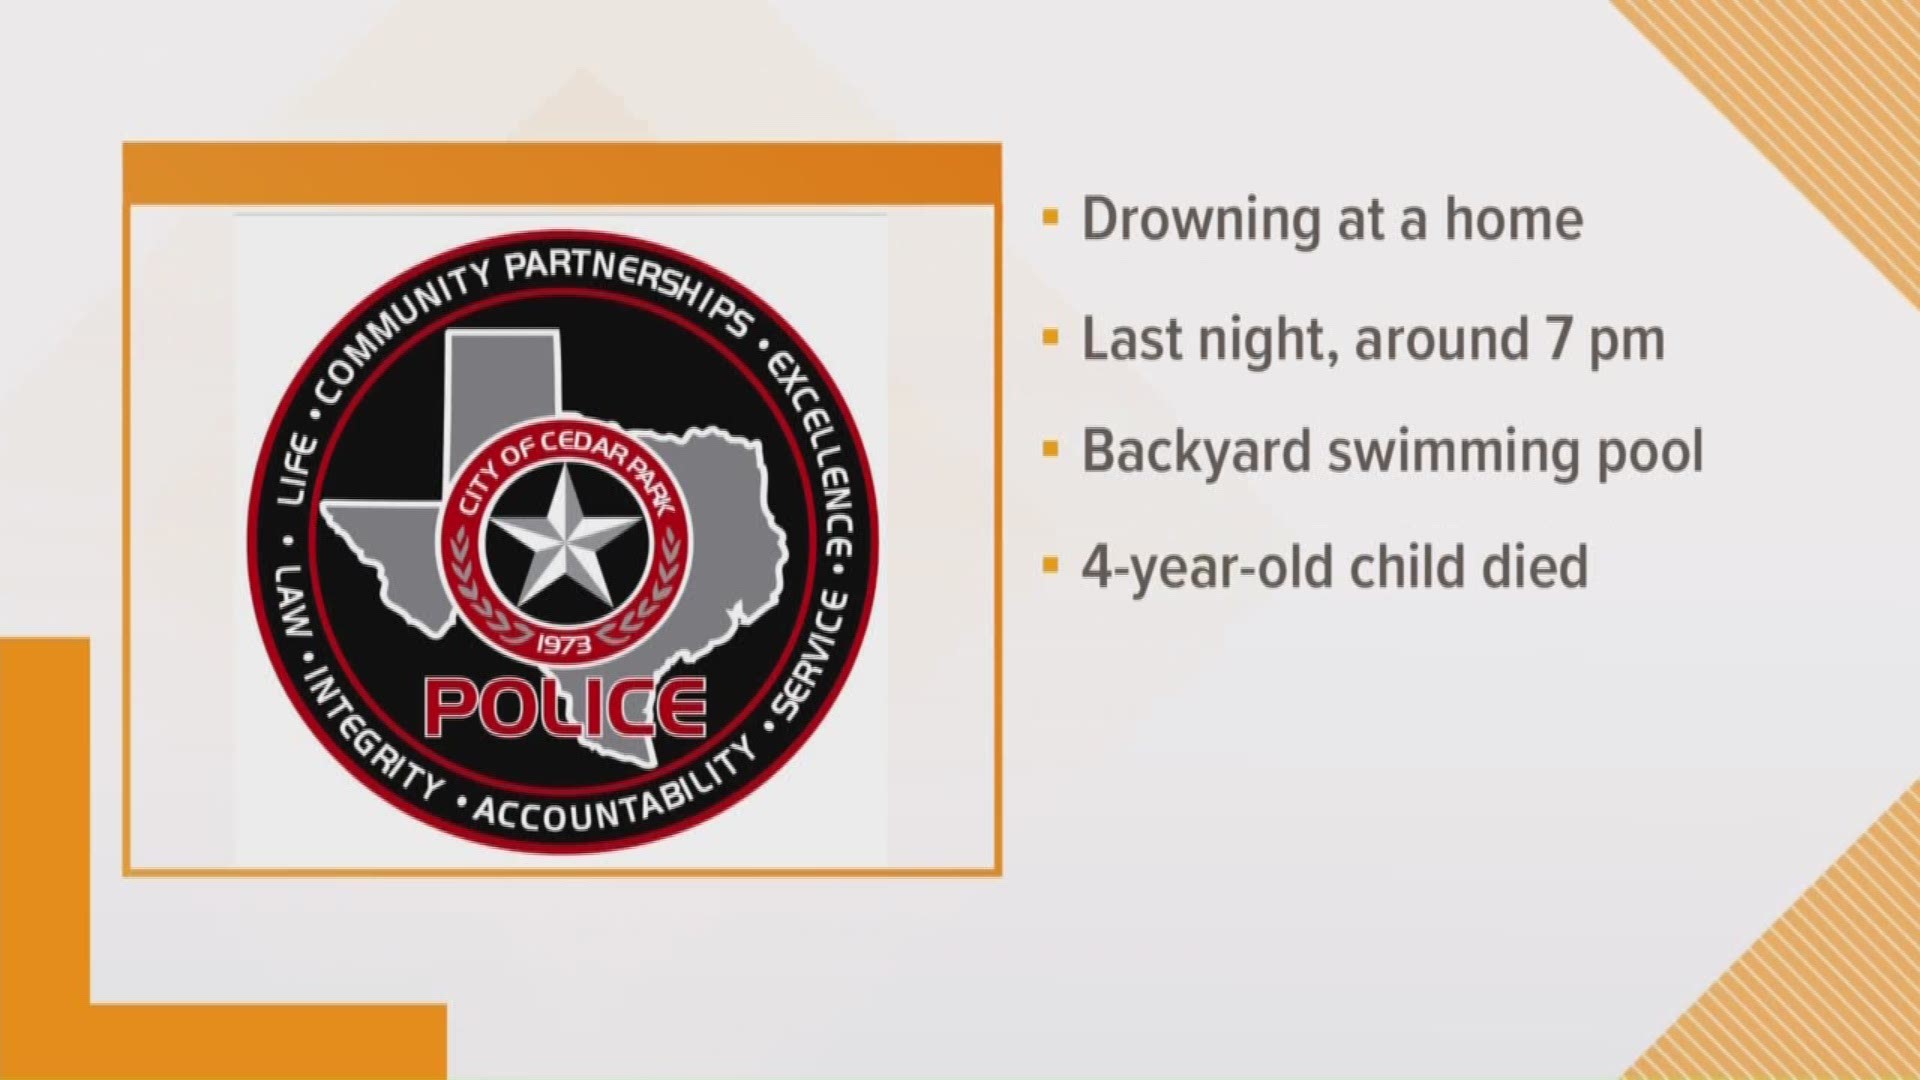 Police said the child drowned in a backyard swimming pool.